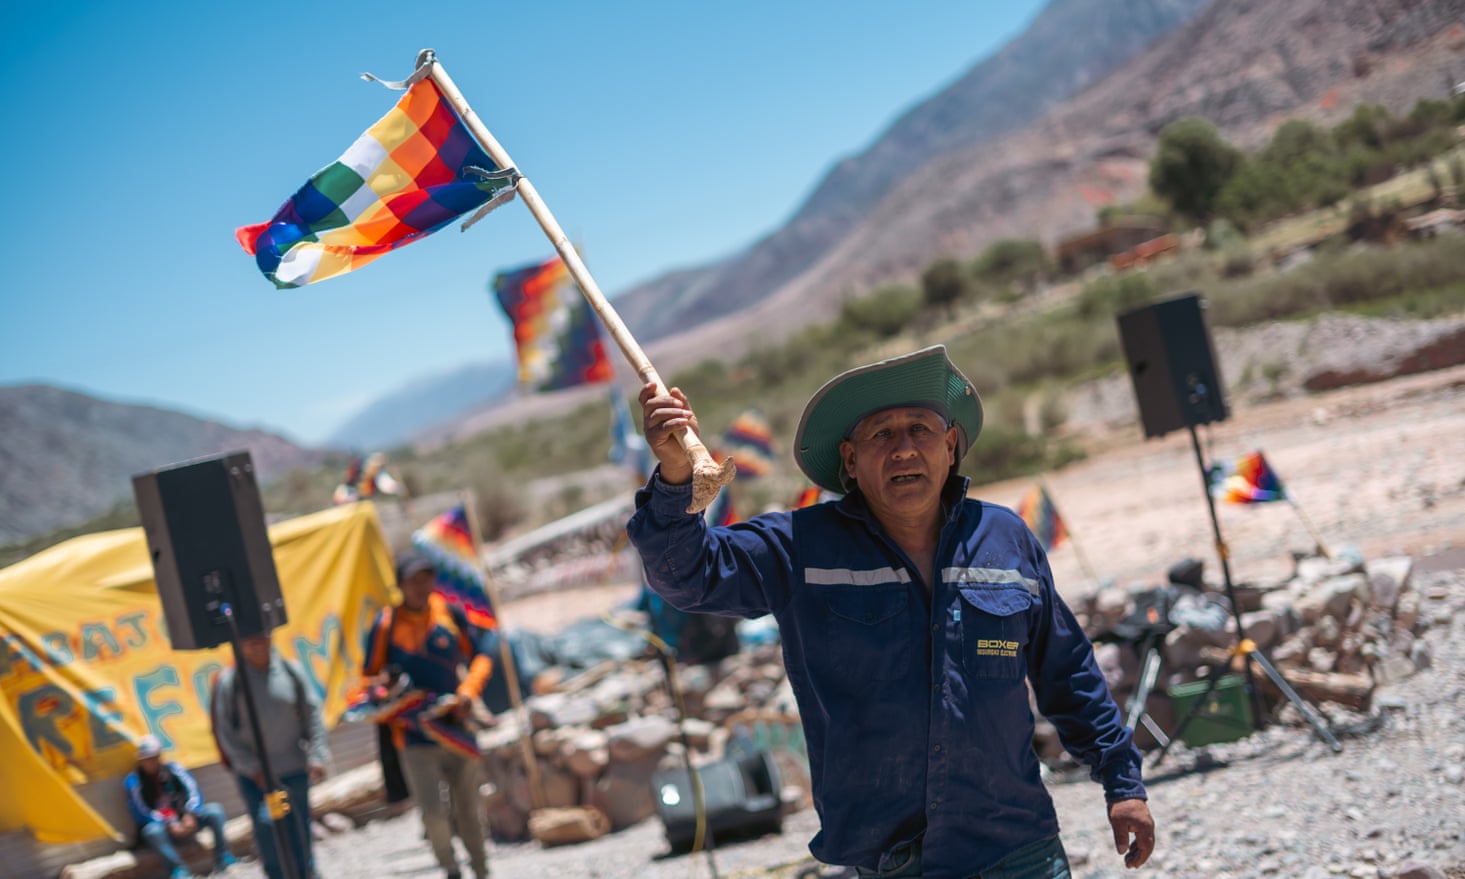 A man carries the Wiphala flag at the protest camp  in Purmamarca, Jujuy province.